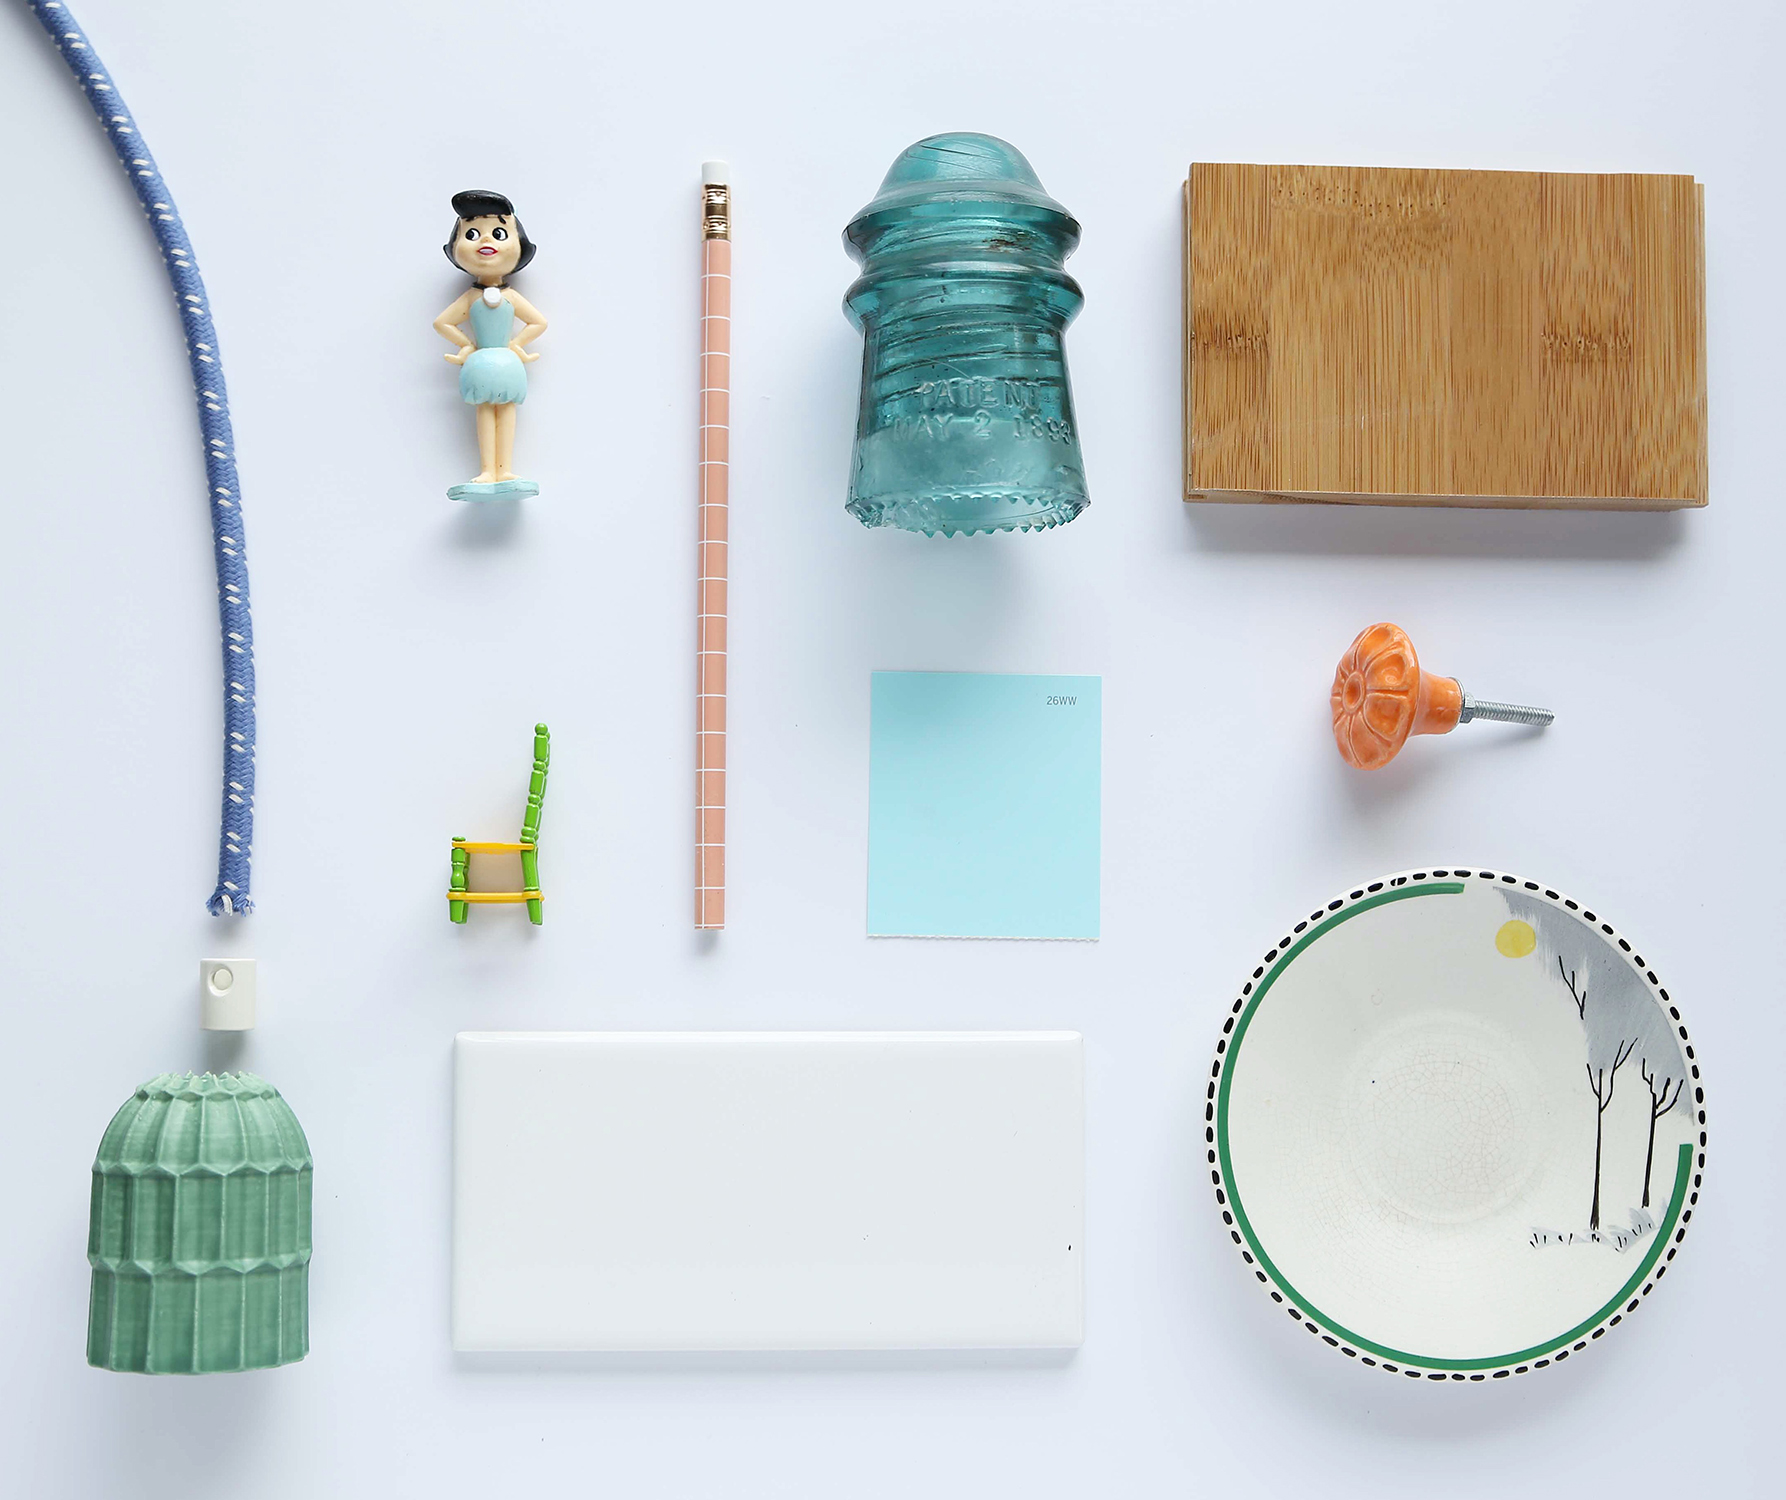 Moodboard with our green ceramic with green cord plus found objects